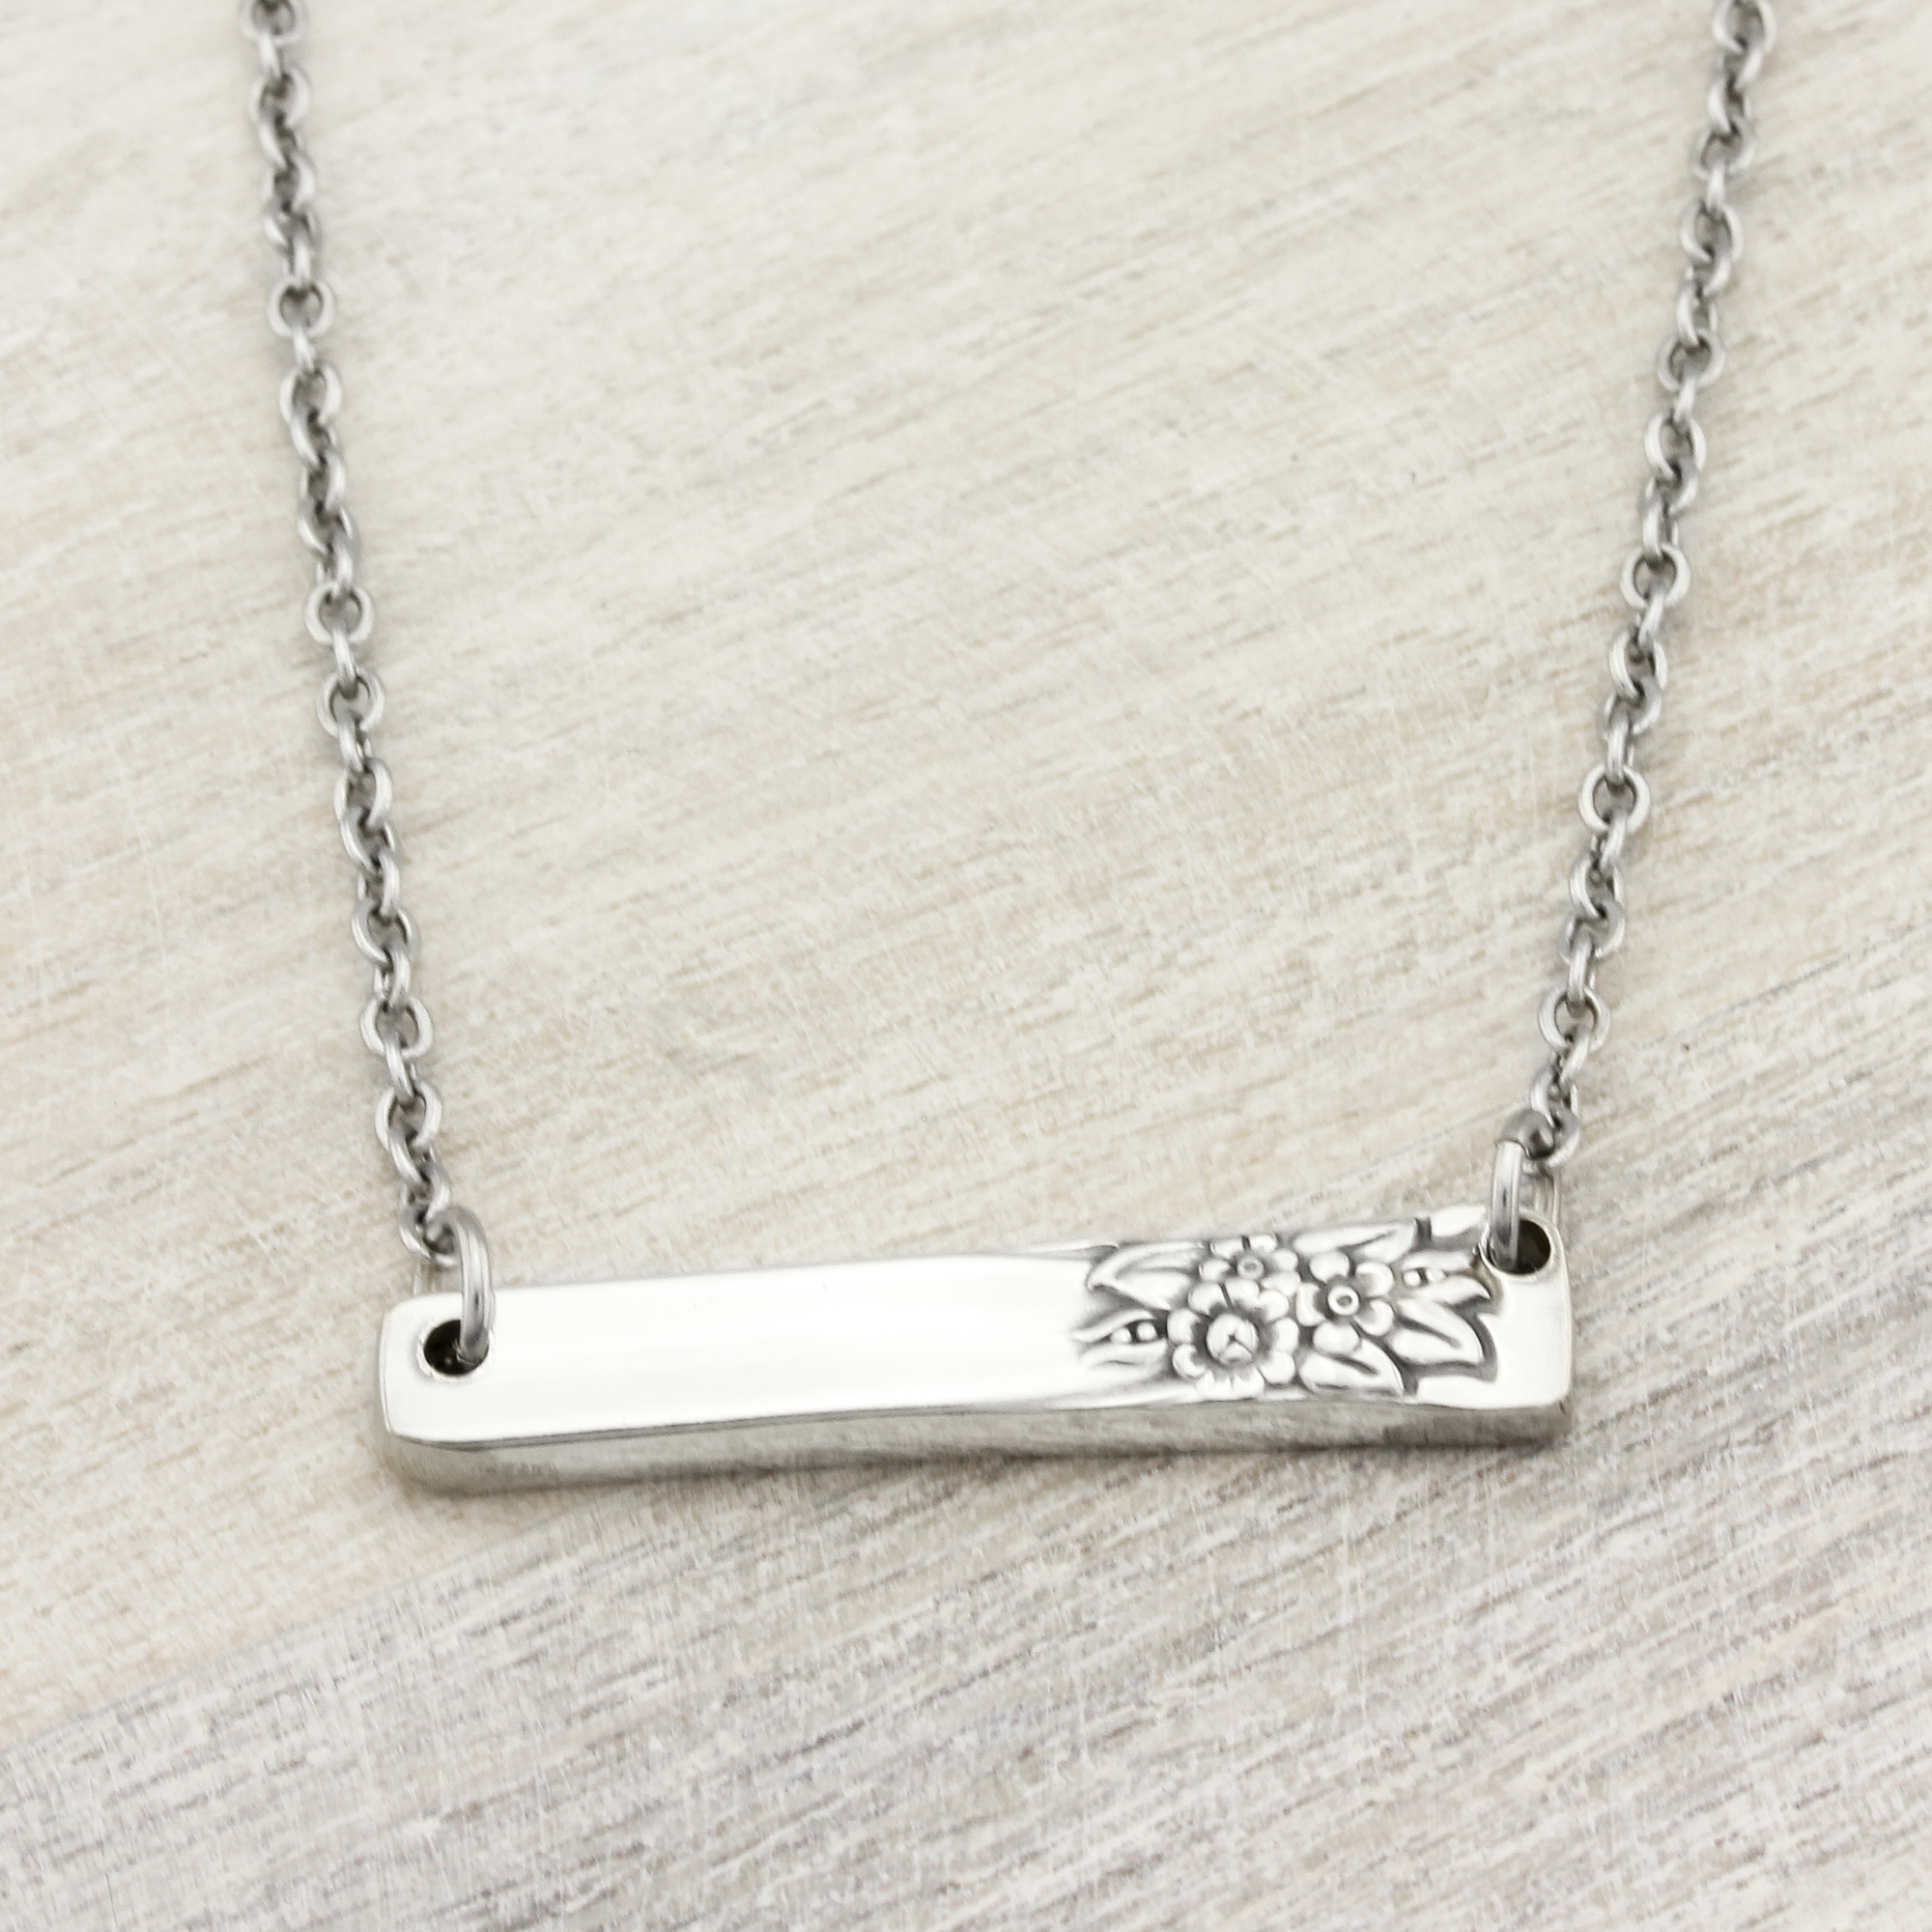 Pendant Necklace made from Vintage Stainless Steel Flatware